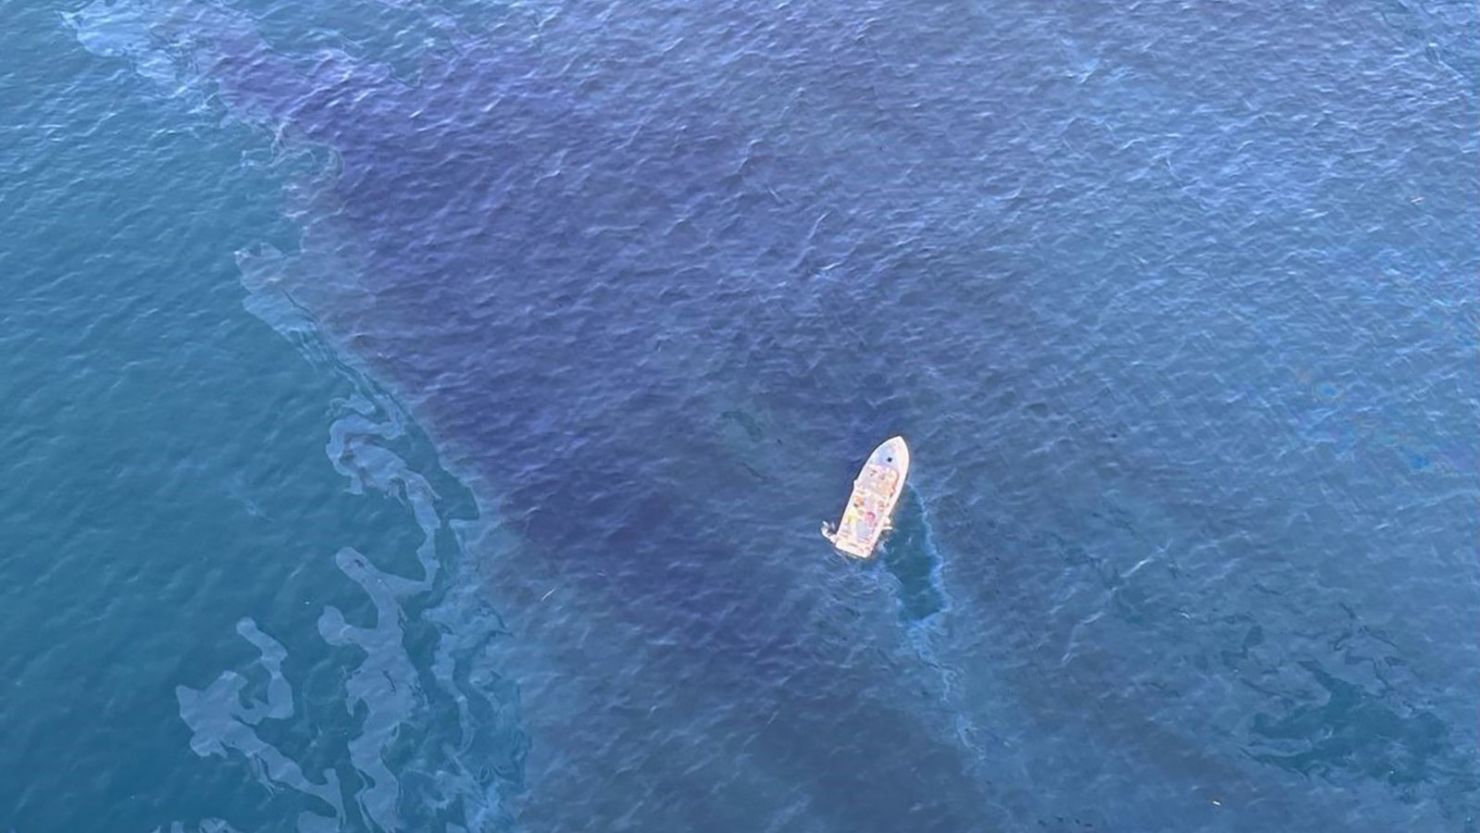 The source of the oil isn't immediately clear, according to the US Coast Guard.